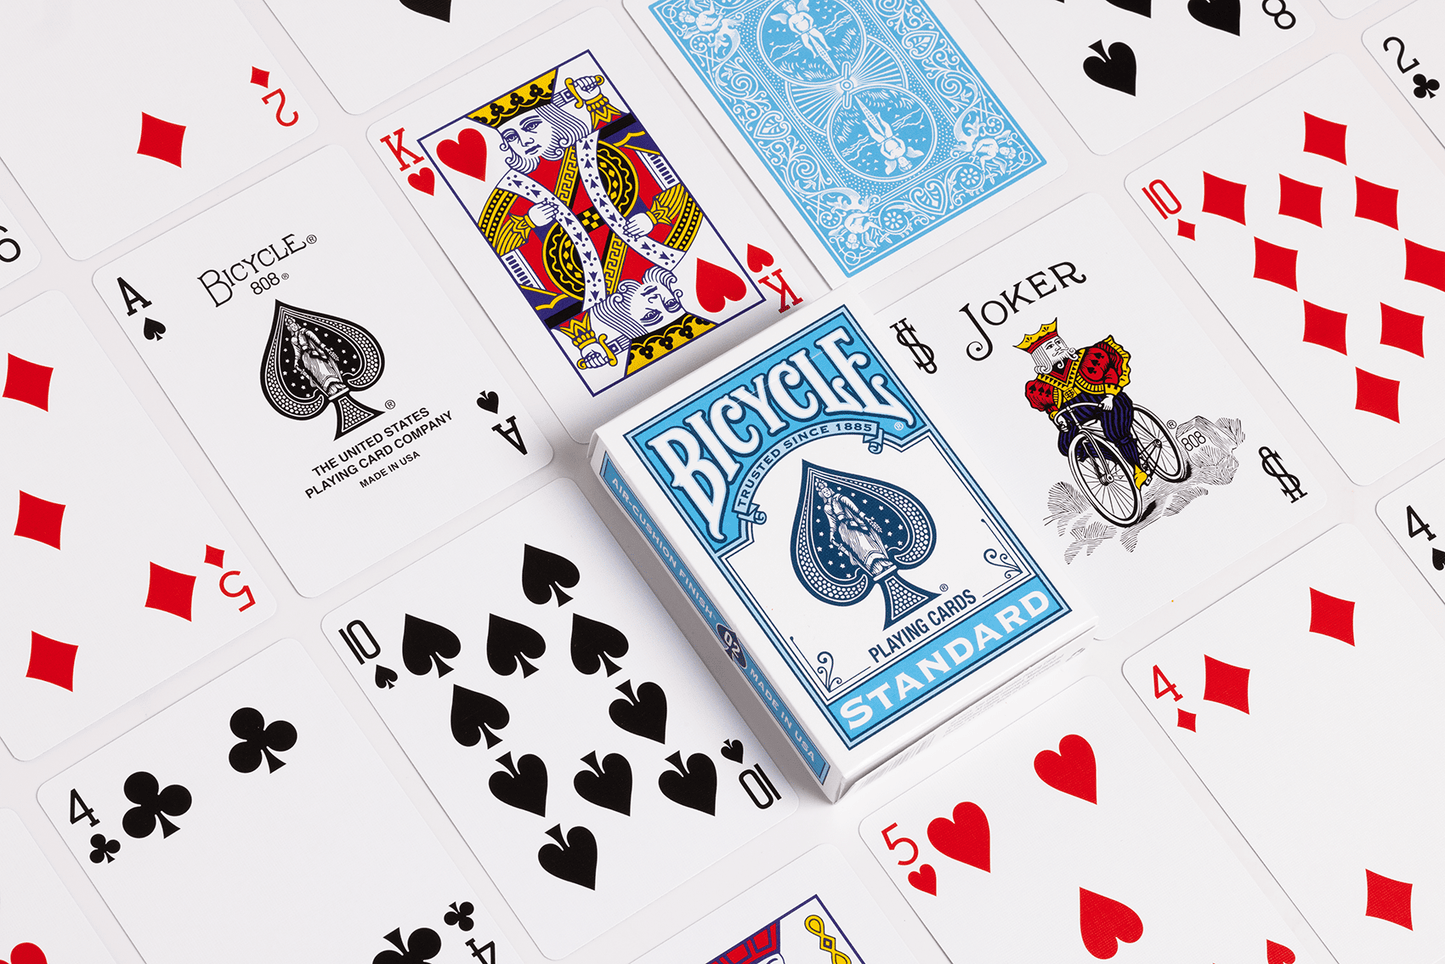 Bicycle Standard Rider Back Breeze Playing Cards